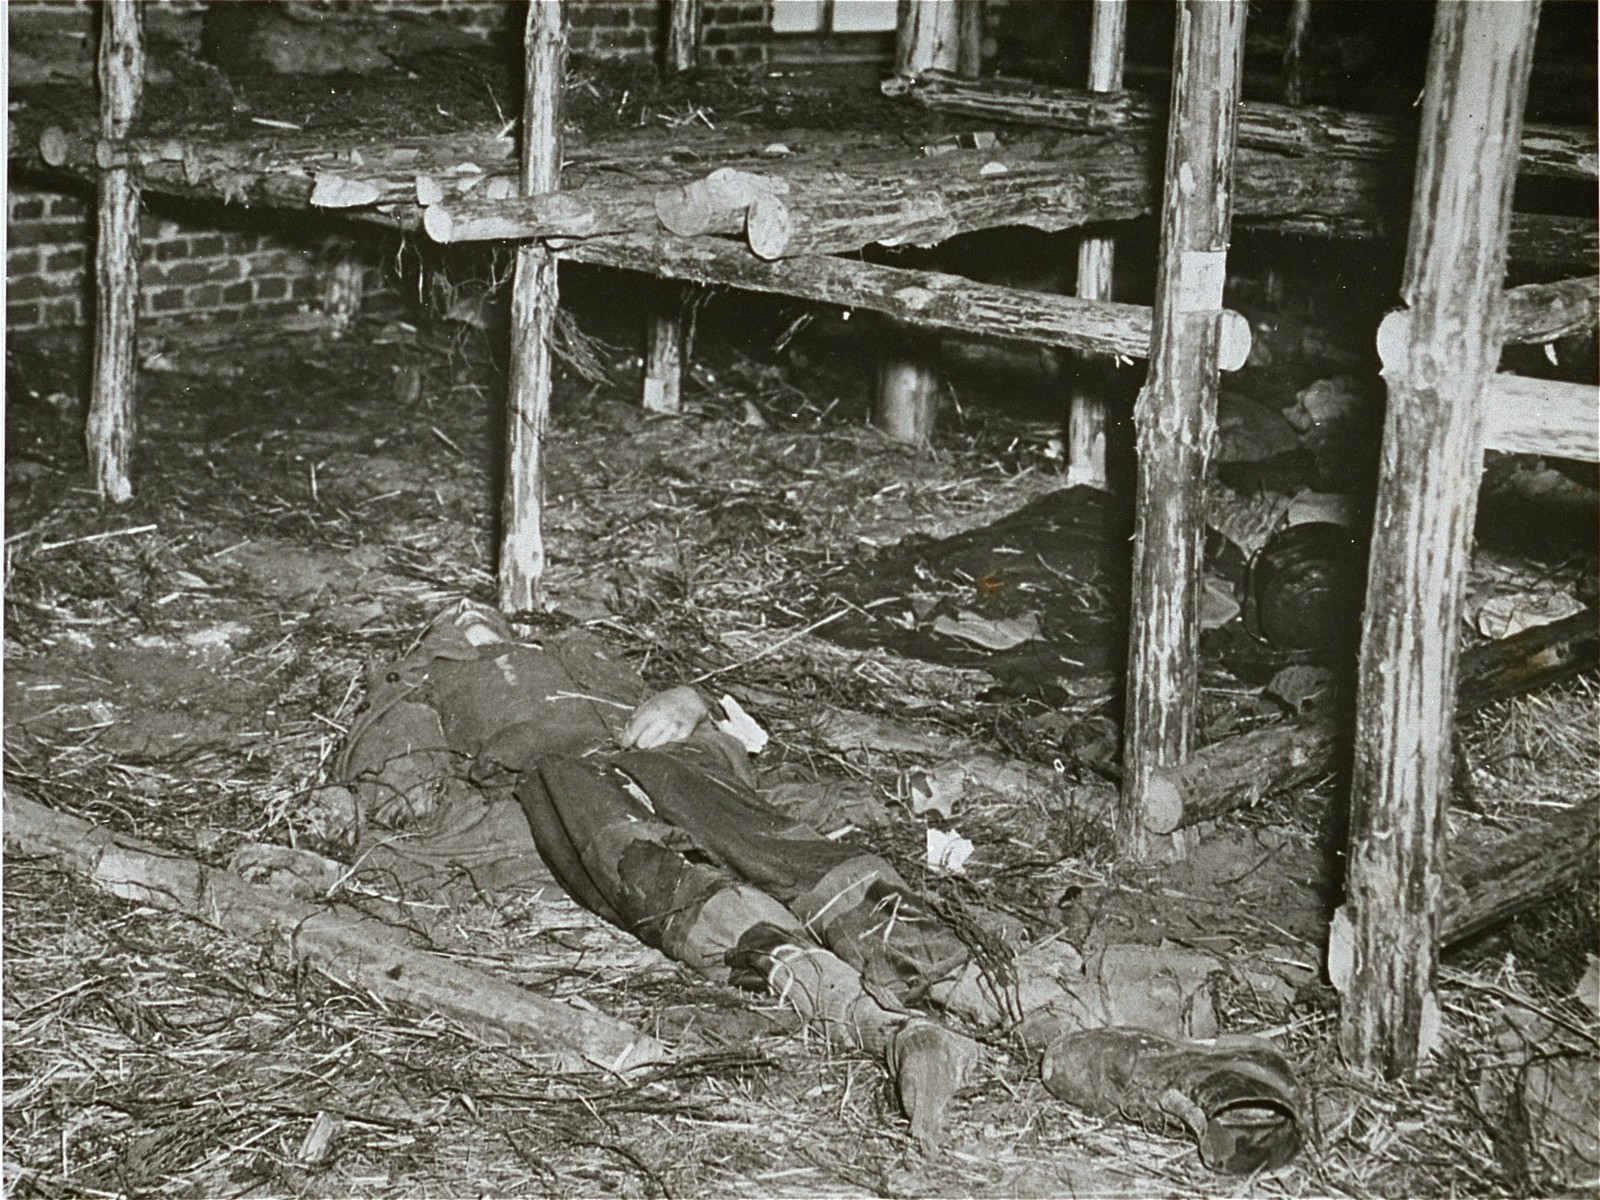 The body of a former prisoner lies on the ground of a barracks of the Woebbelin concentration camp.

Original Caption: "This camp, recently captured by troops of the US Ninth Army, had prisoners who starved to death. Here one lies on the floor in the living quarters of the prisoners."